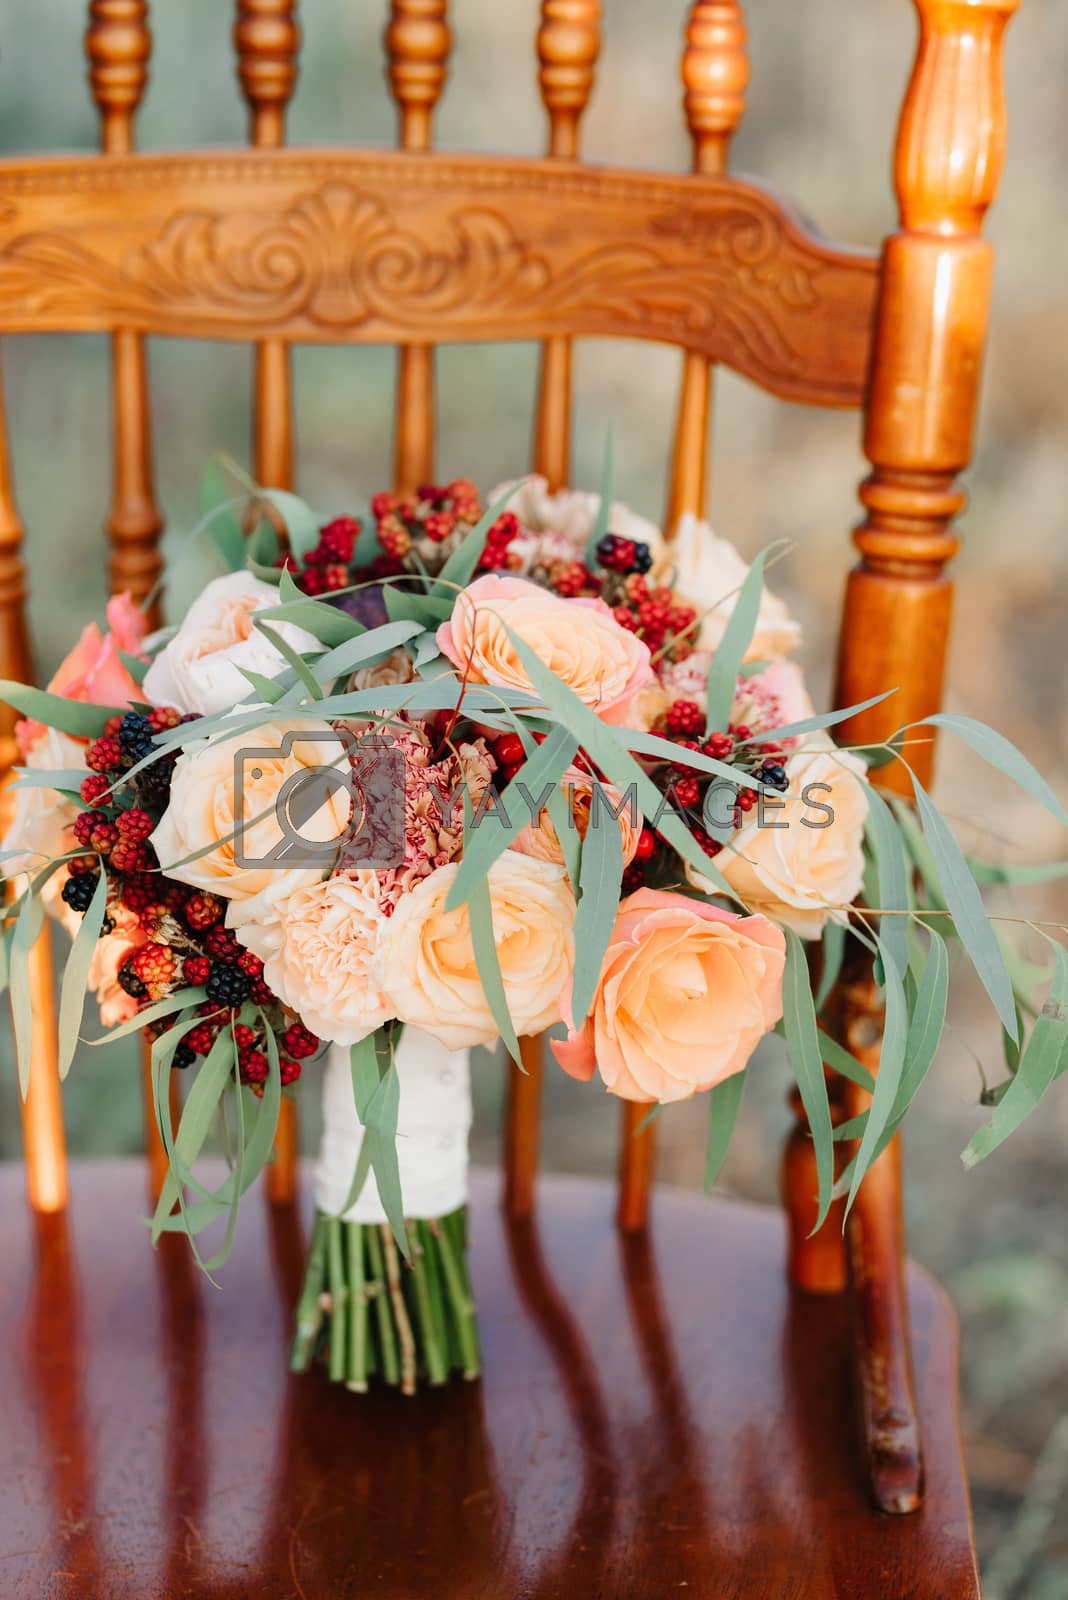 Royalty free image of wedding bouquet by Andreua